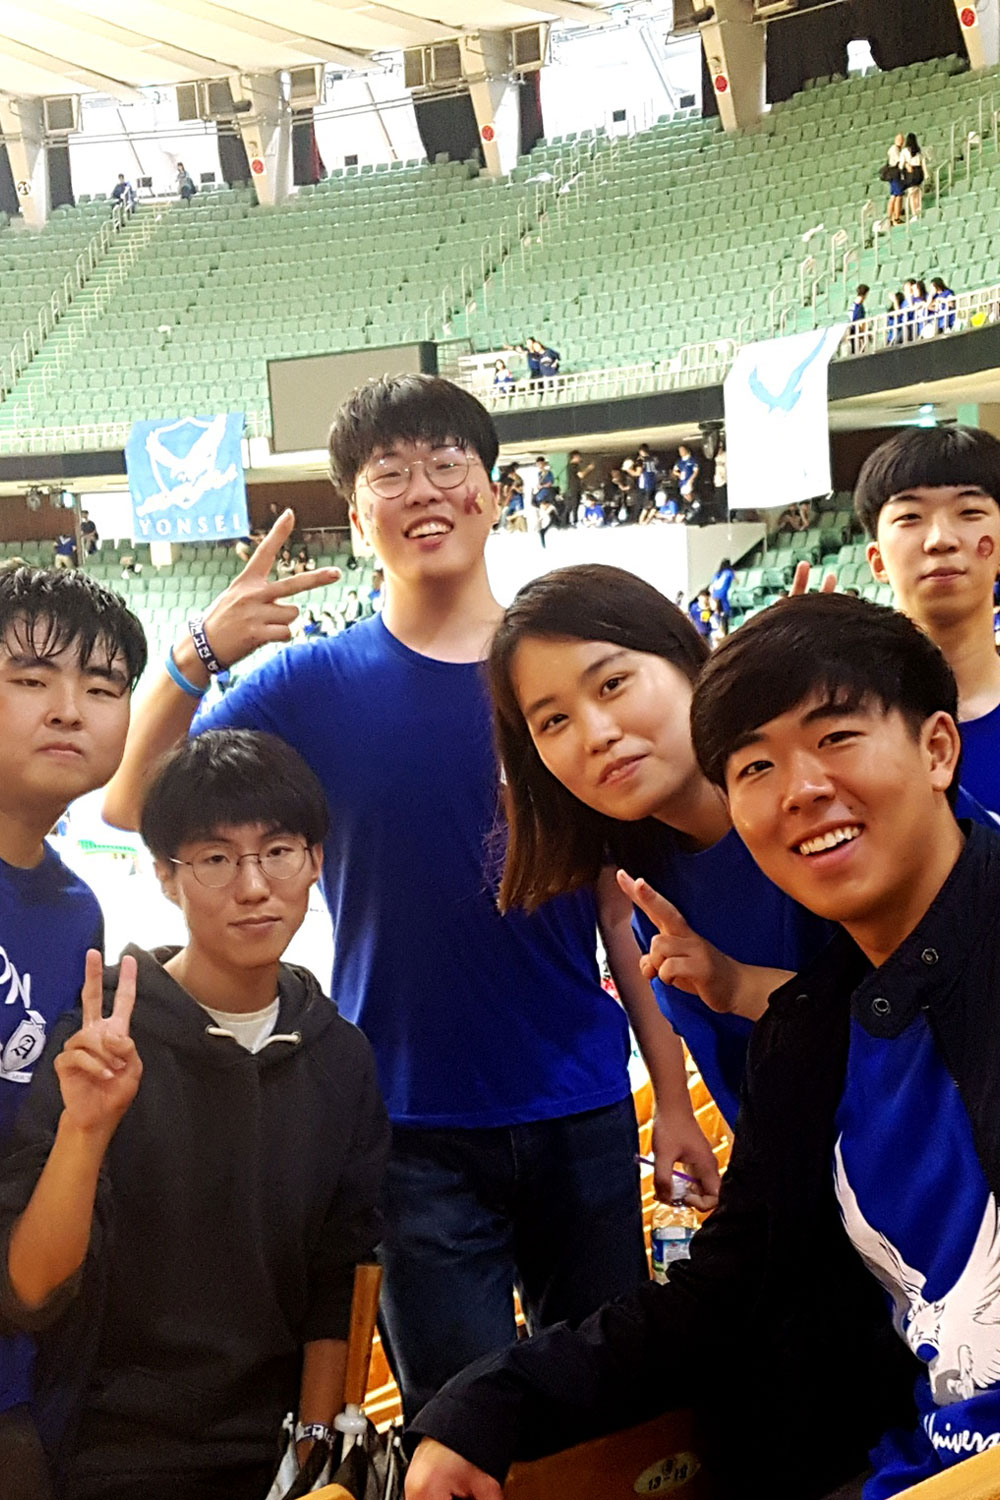 Brandon Yoon attends a sports festival with local students.